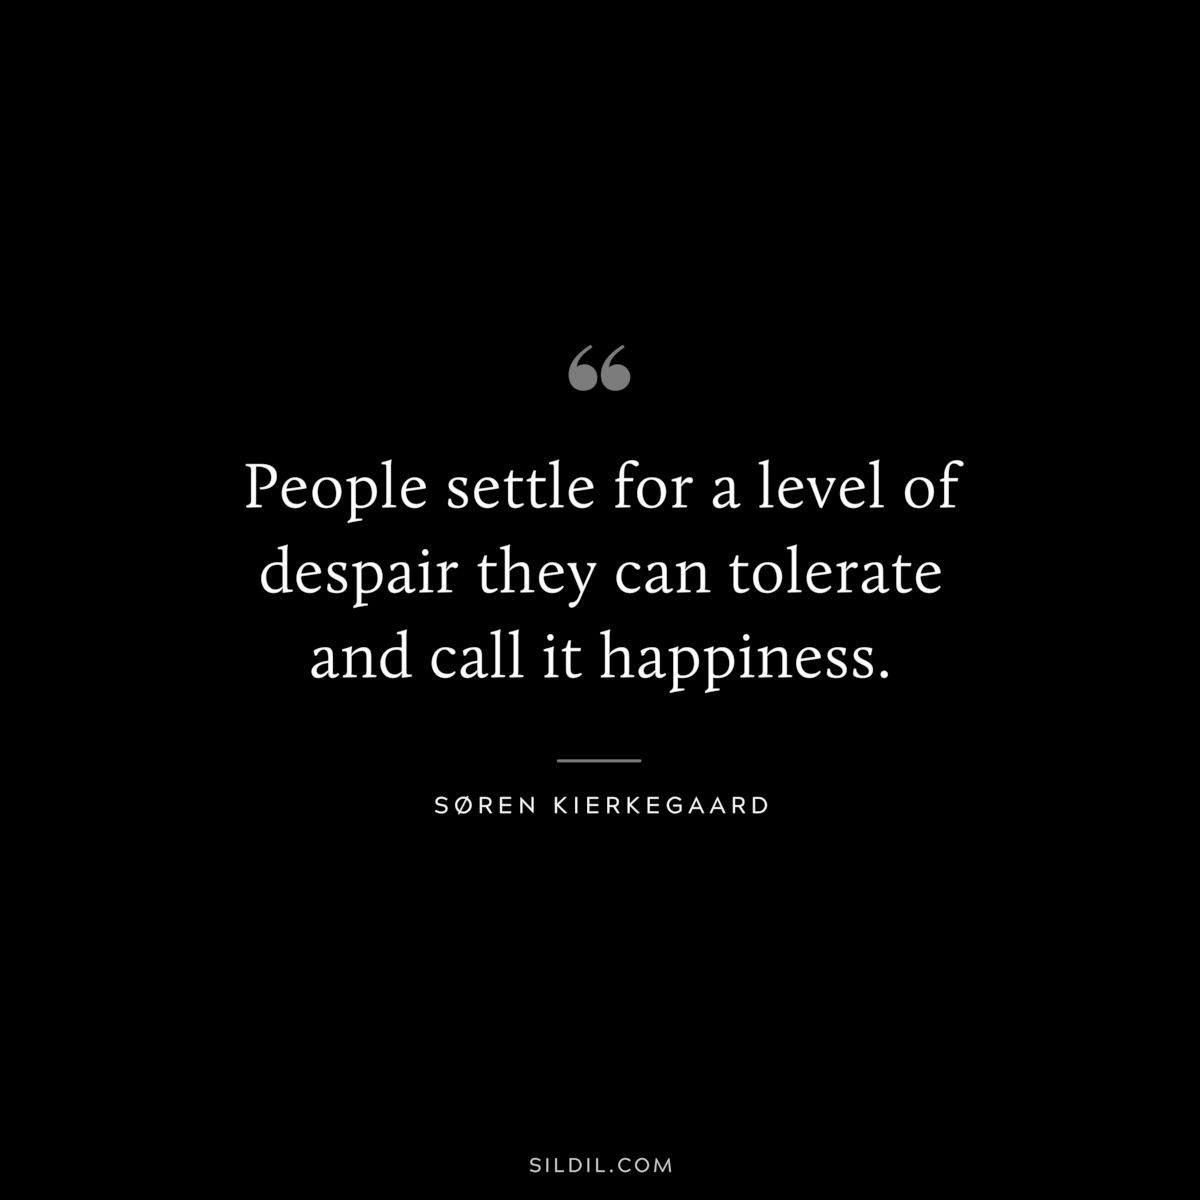 People settle for a level of despair they can tolerate and call it happiness. ― Søren Kierkegaard